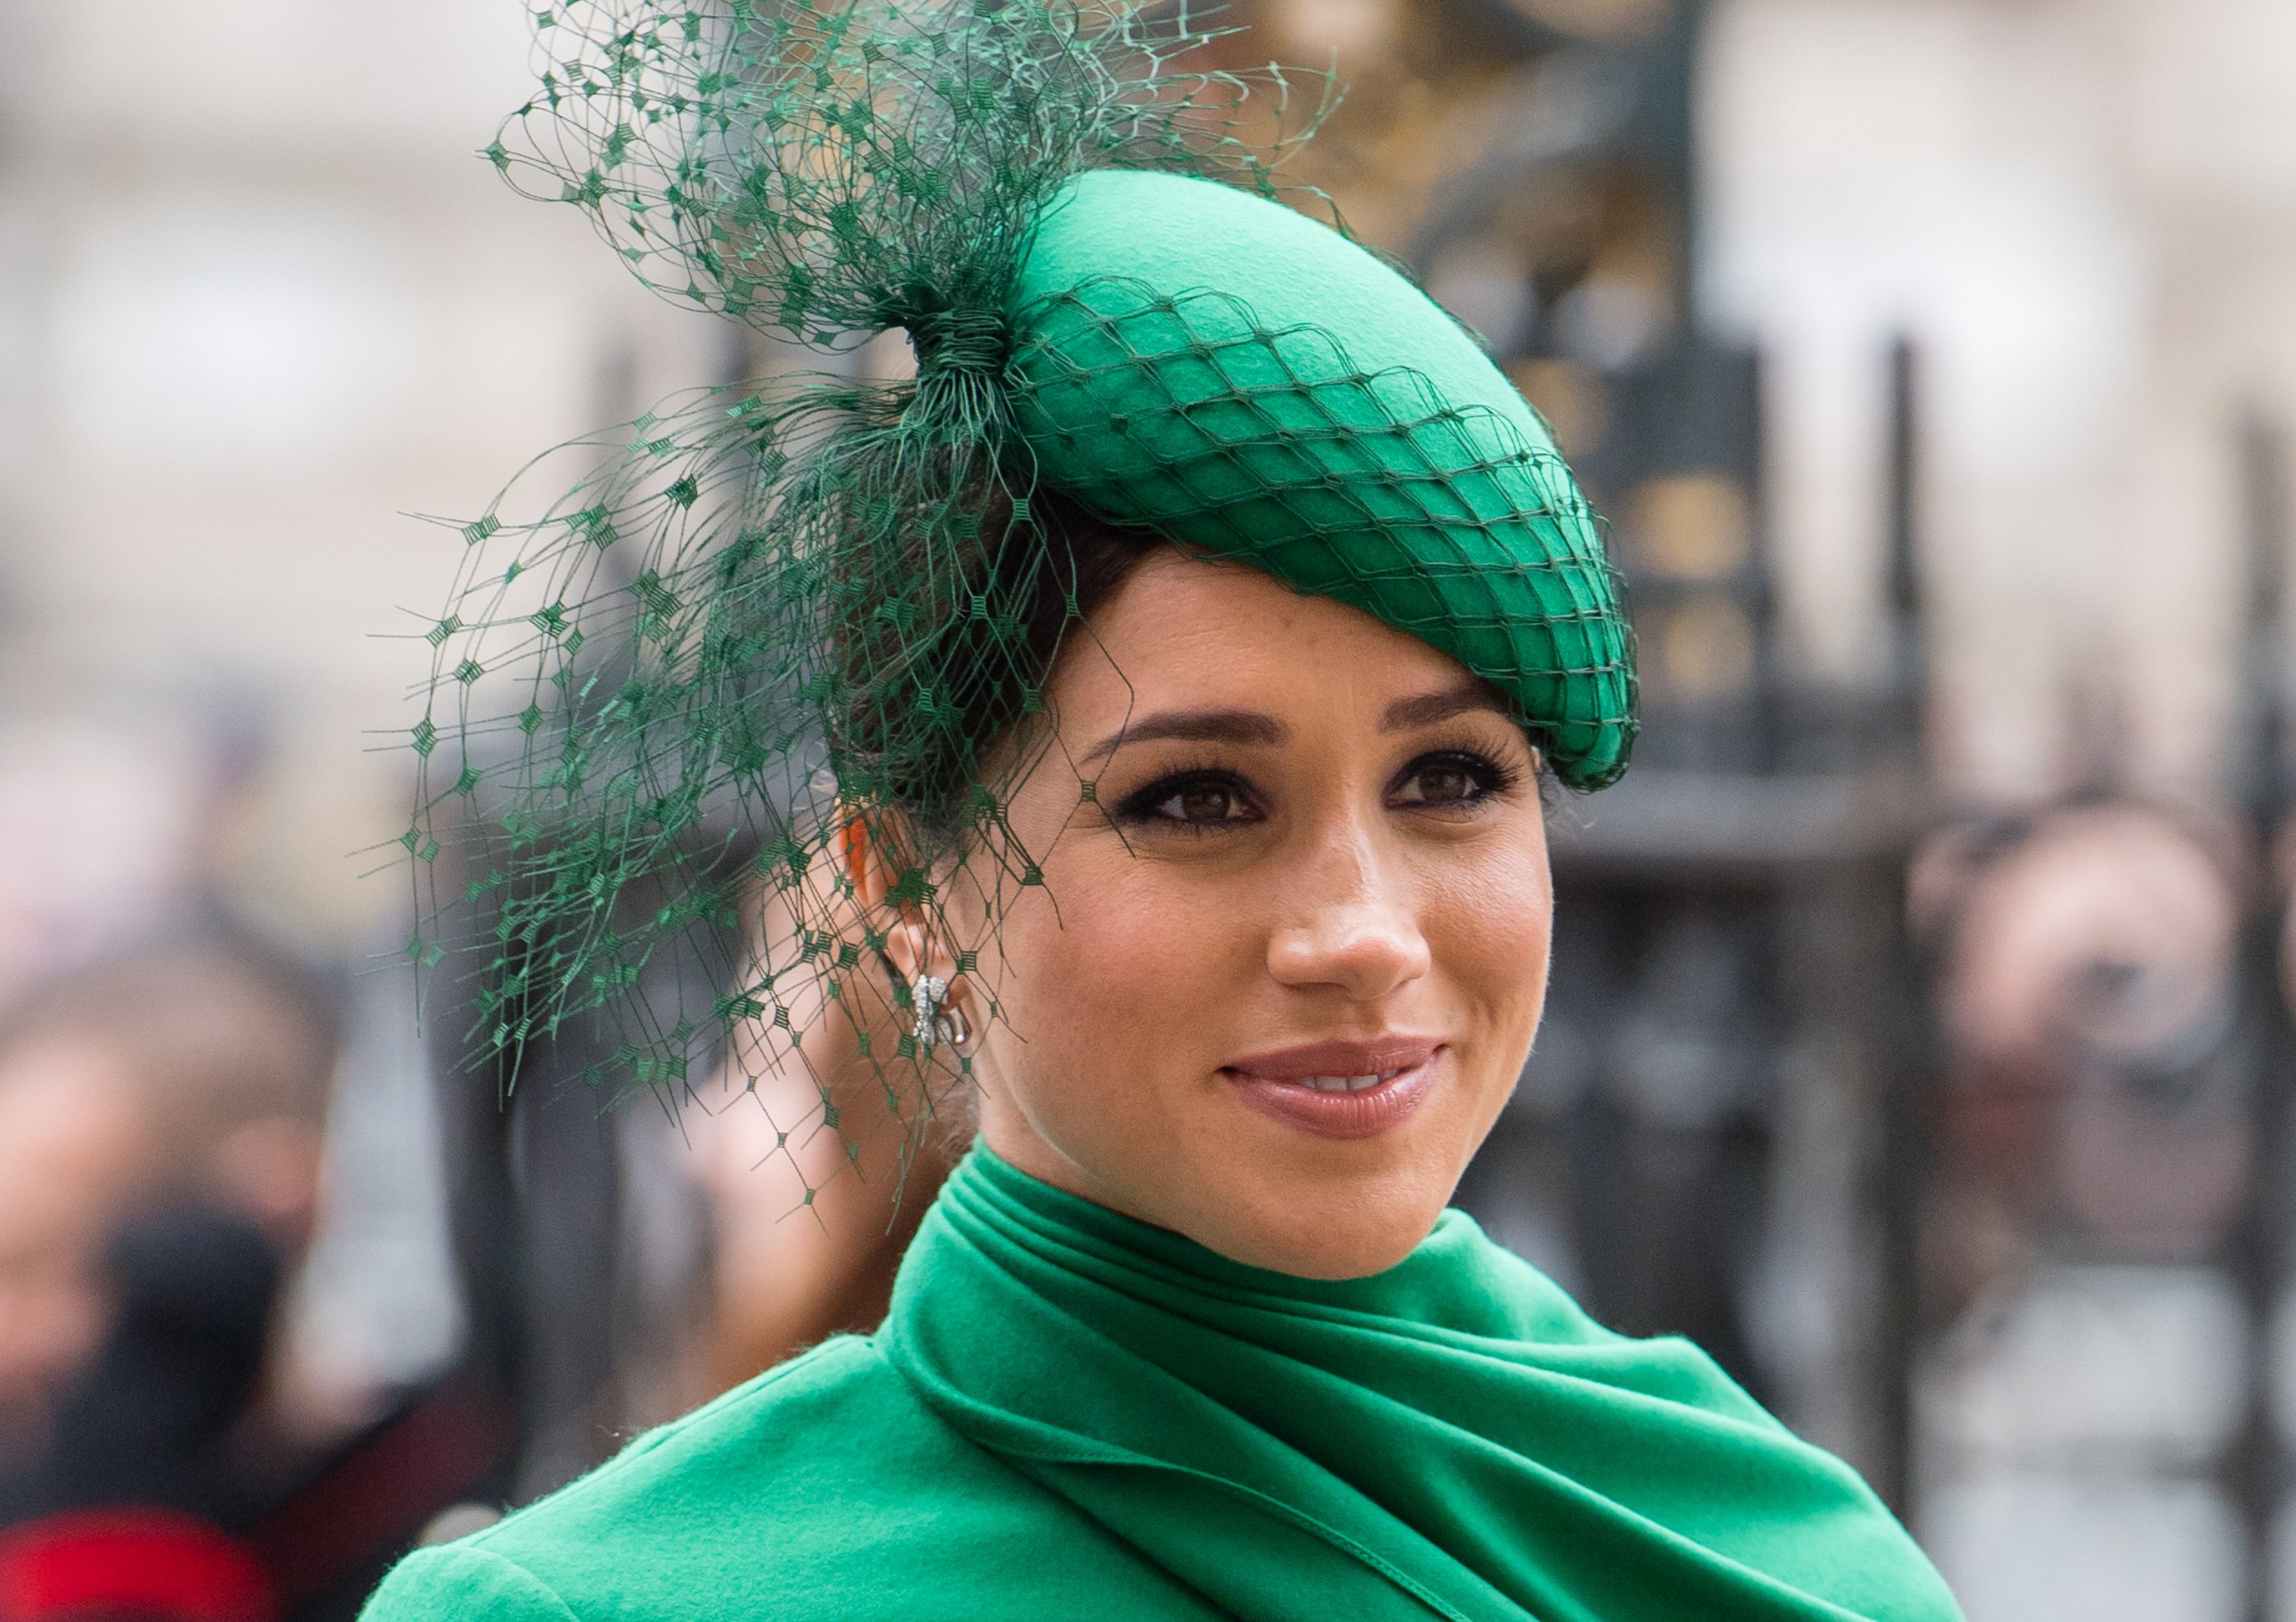 Meghan, Duchess of Sussex at the Commonwealth Day Service on March 09, 2020 in London, England. | Source: Getty Images